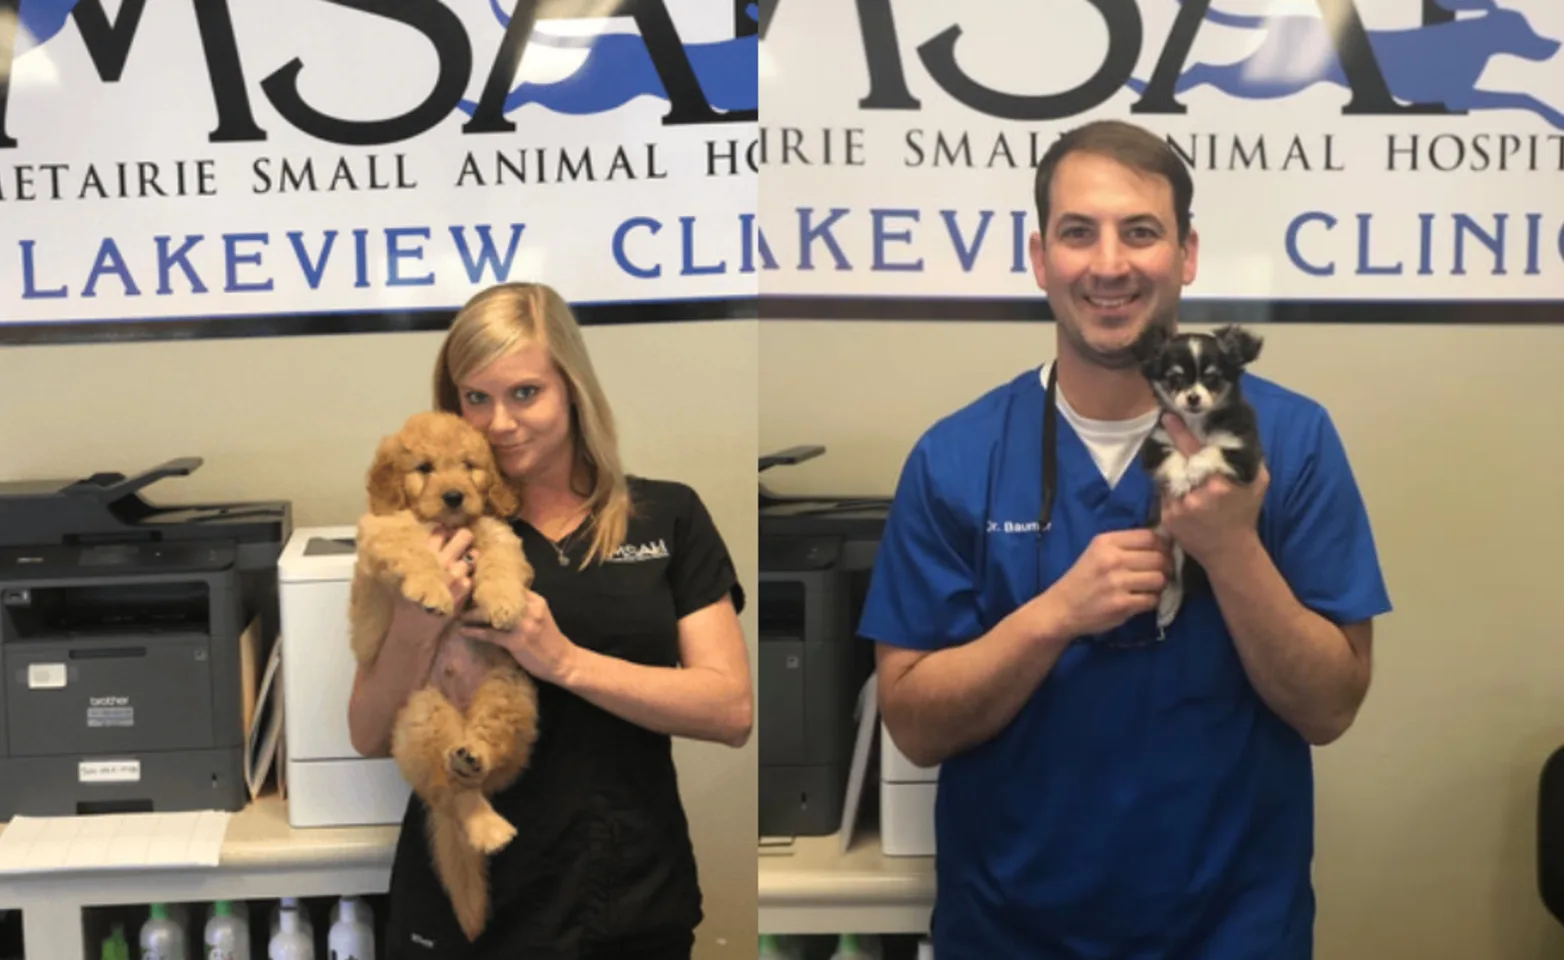 Metairie Small Animal Hospital (MSAH) - Lakeview Clinic Staff with Dogs